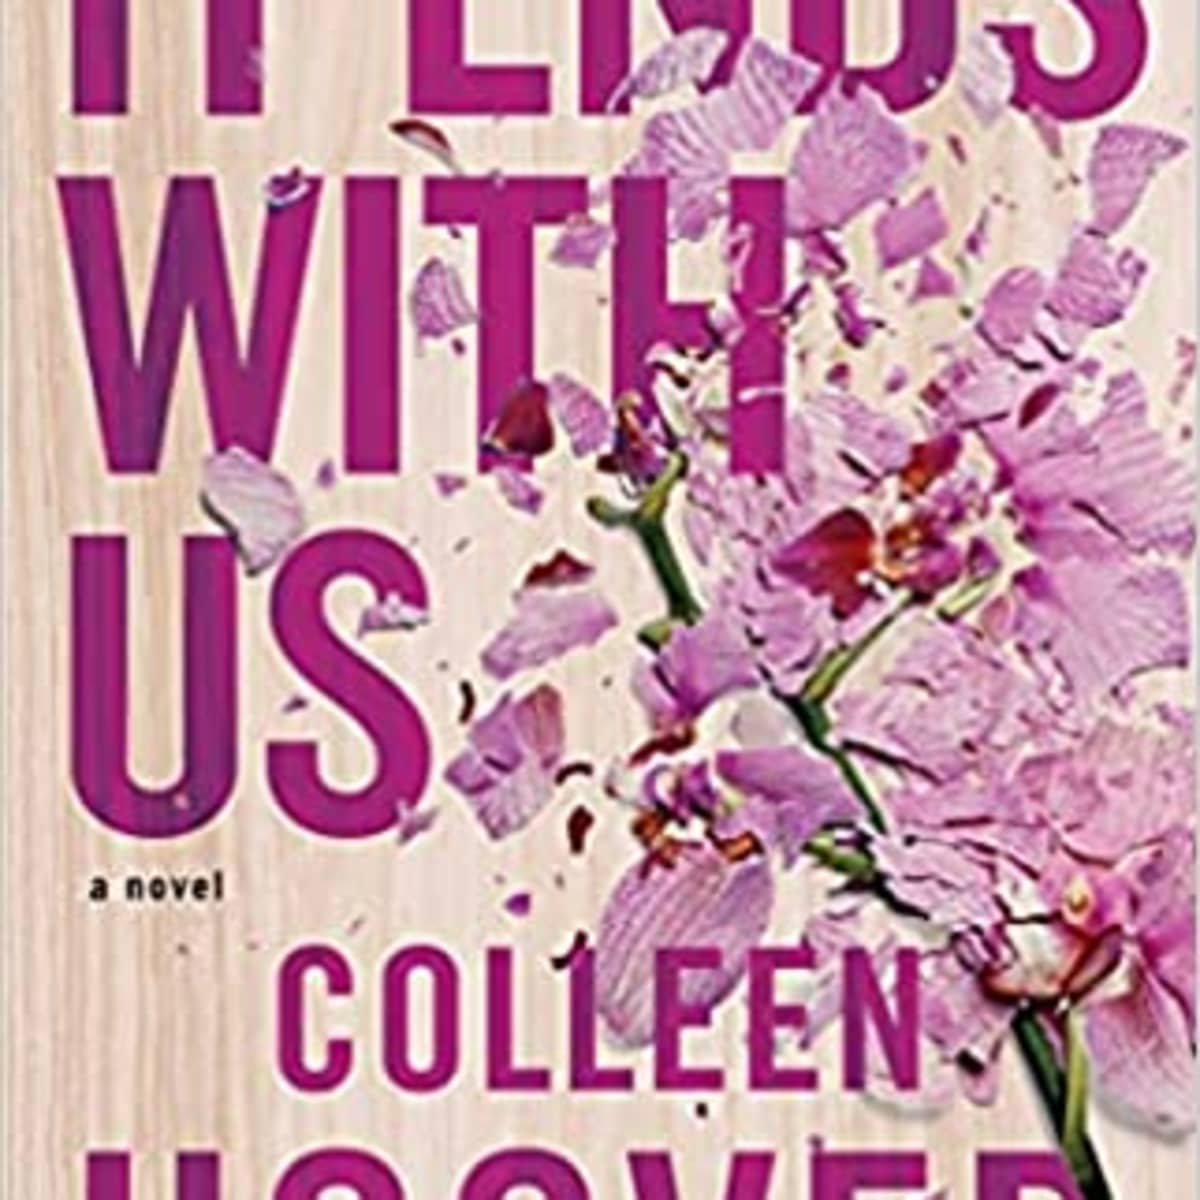 Colleen Hoover Romanticizes Toxic Relationships – THE SPECTATOR